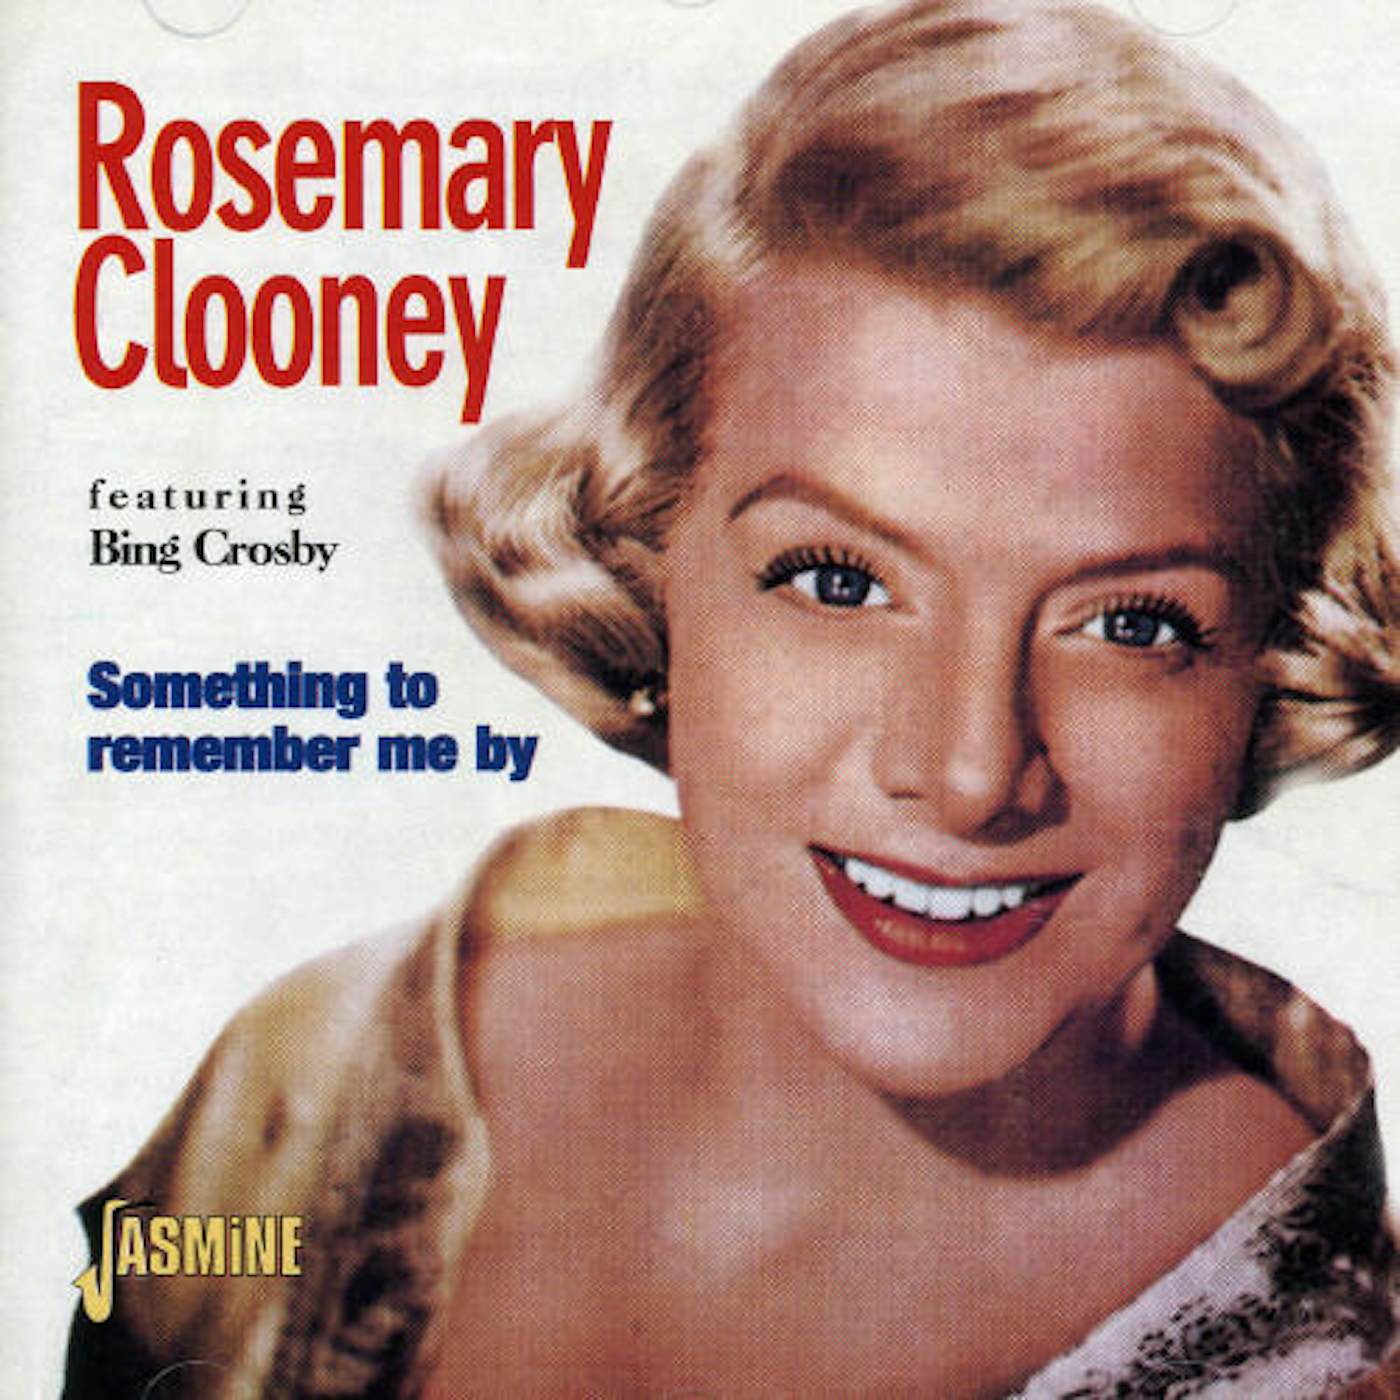 Rosemary Clooney SOMETHING TO REMEMBER ME BY CD